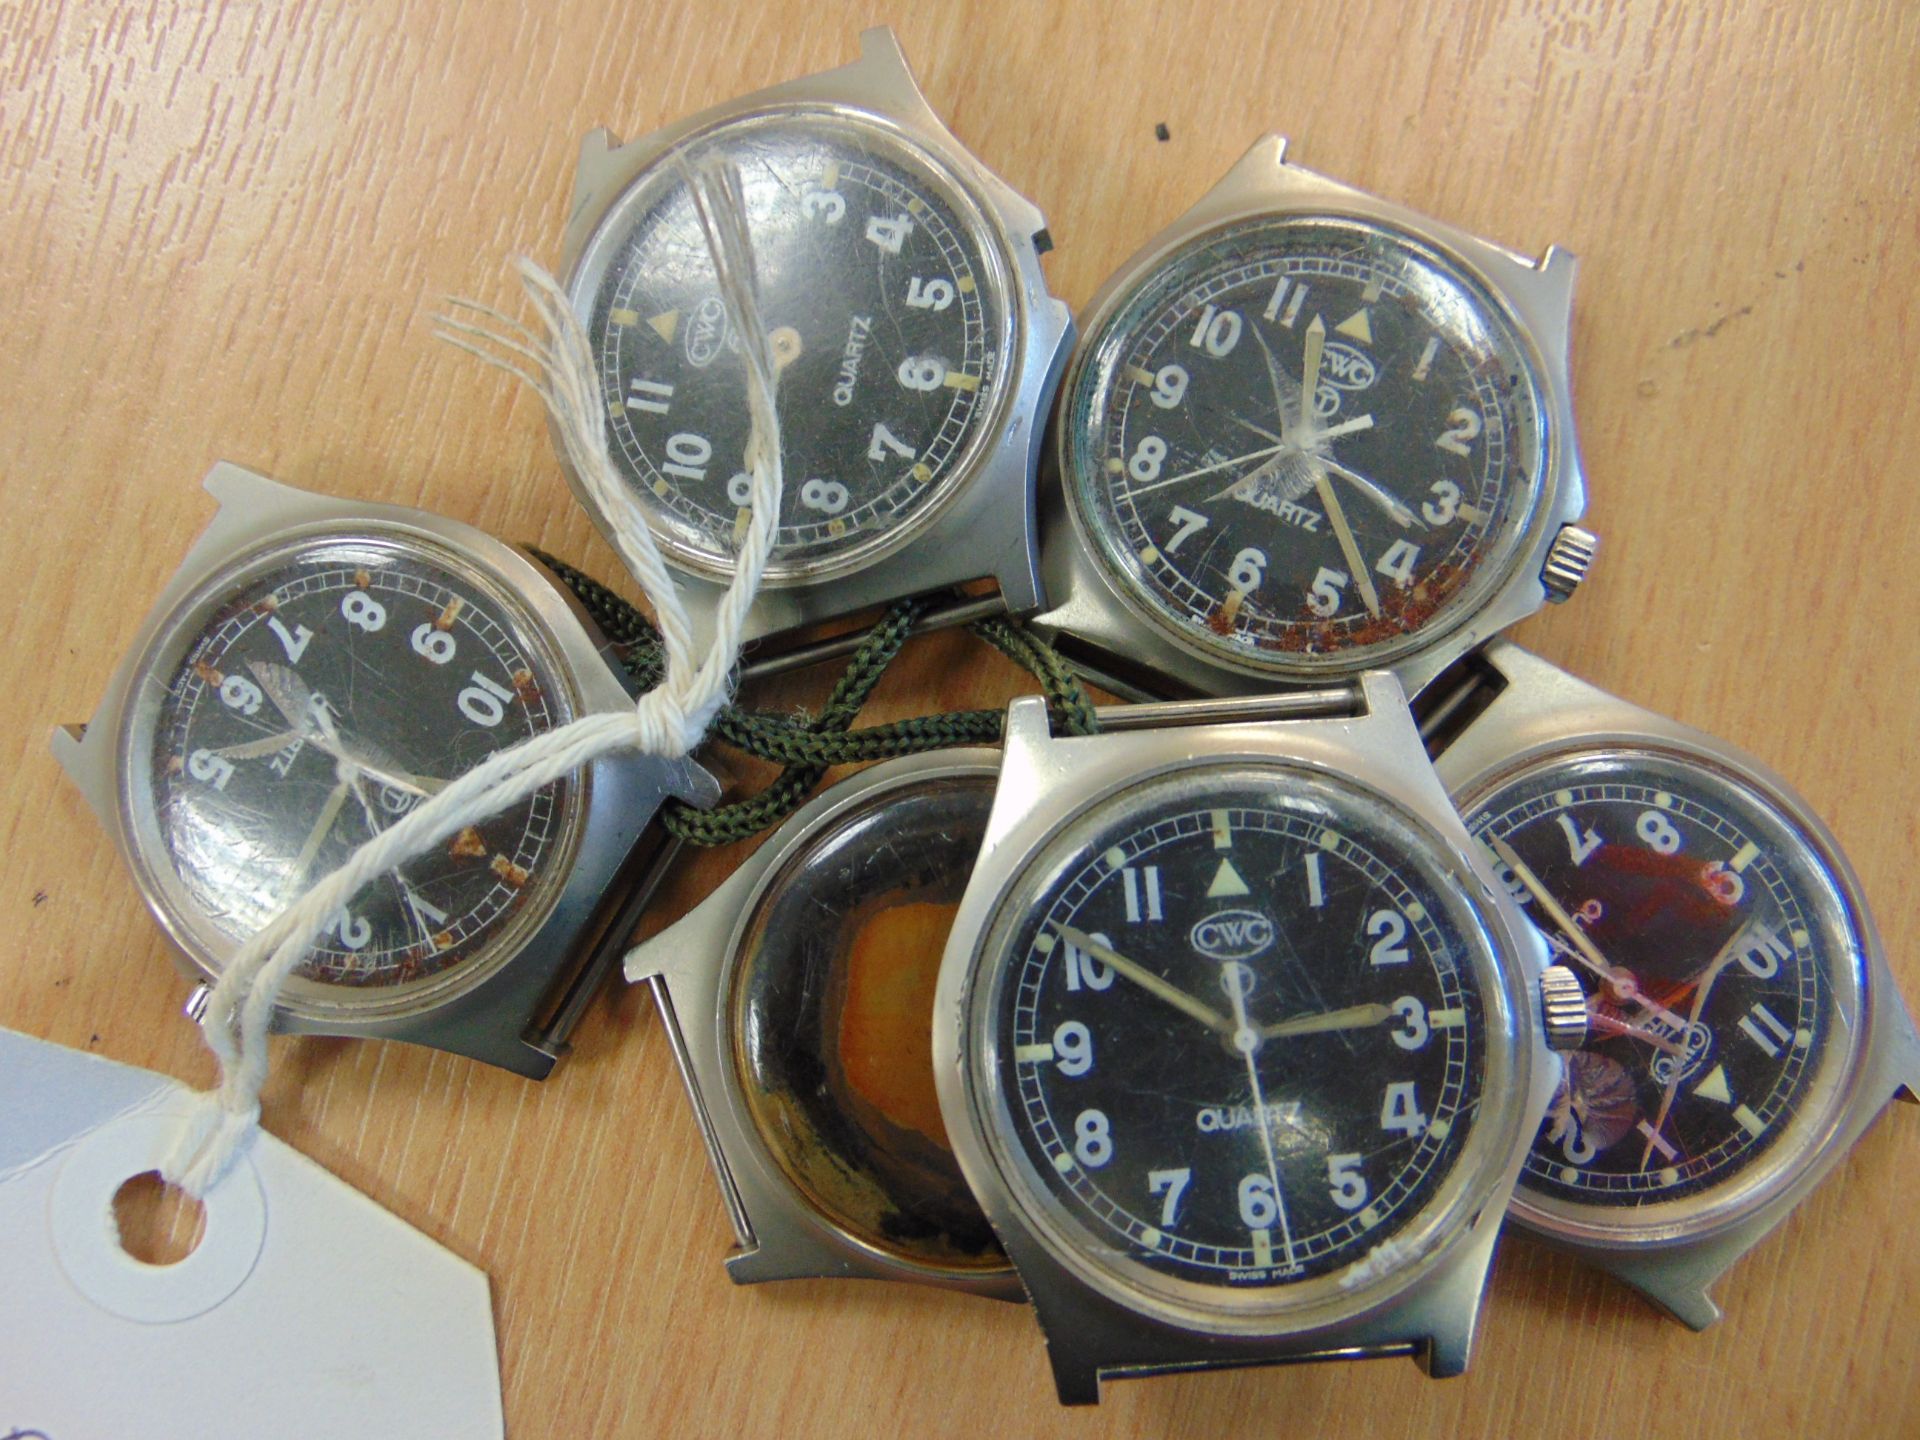 6X CWC W10 0552 SERVICES WATCHES - SPARES OR REPAIR - Image 3 of 6